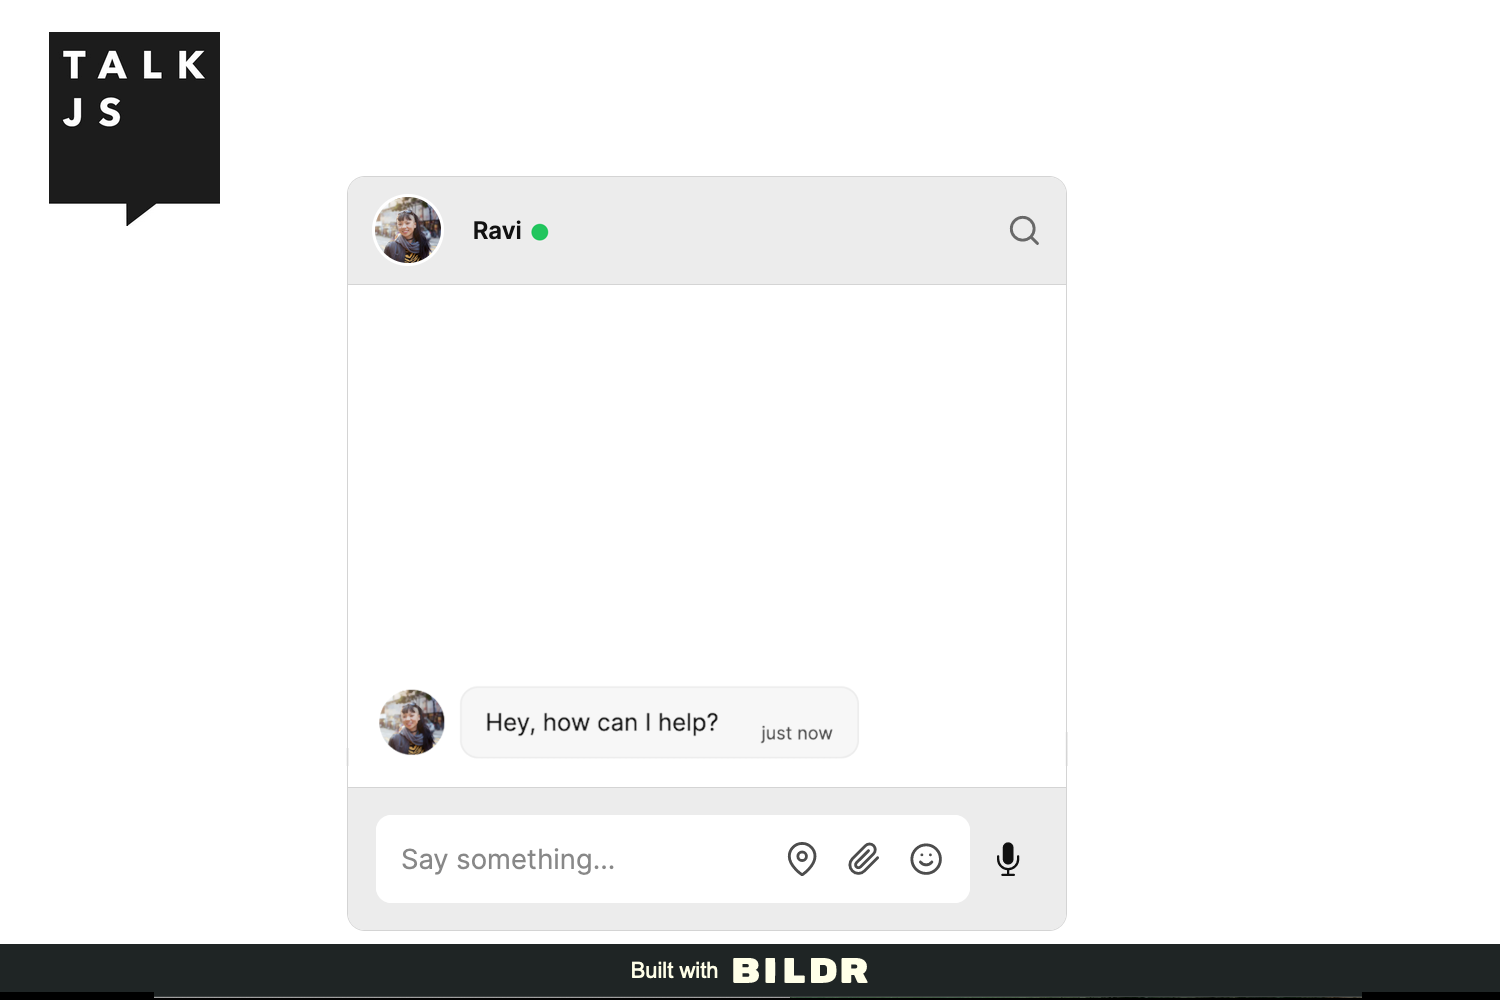 An overview of an empty Bildr page with TalkJS chat integrated. At the top left is a TalkJS logo, and at the bottom a banner stating ‘Built with BILDR’. At the center is a TalkJS chat with a person asking: ‘Hey, how can I help?’.